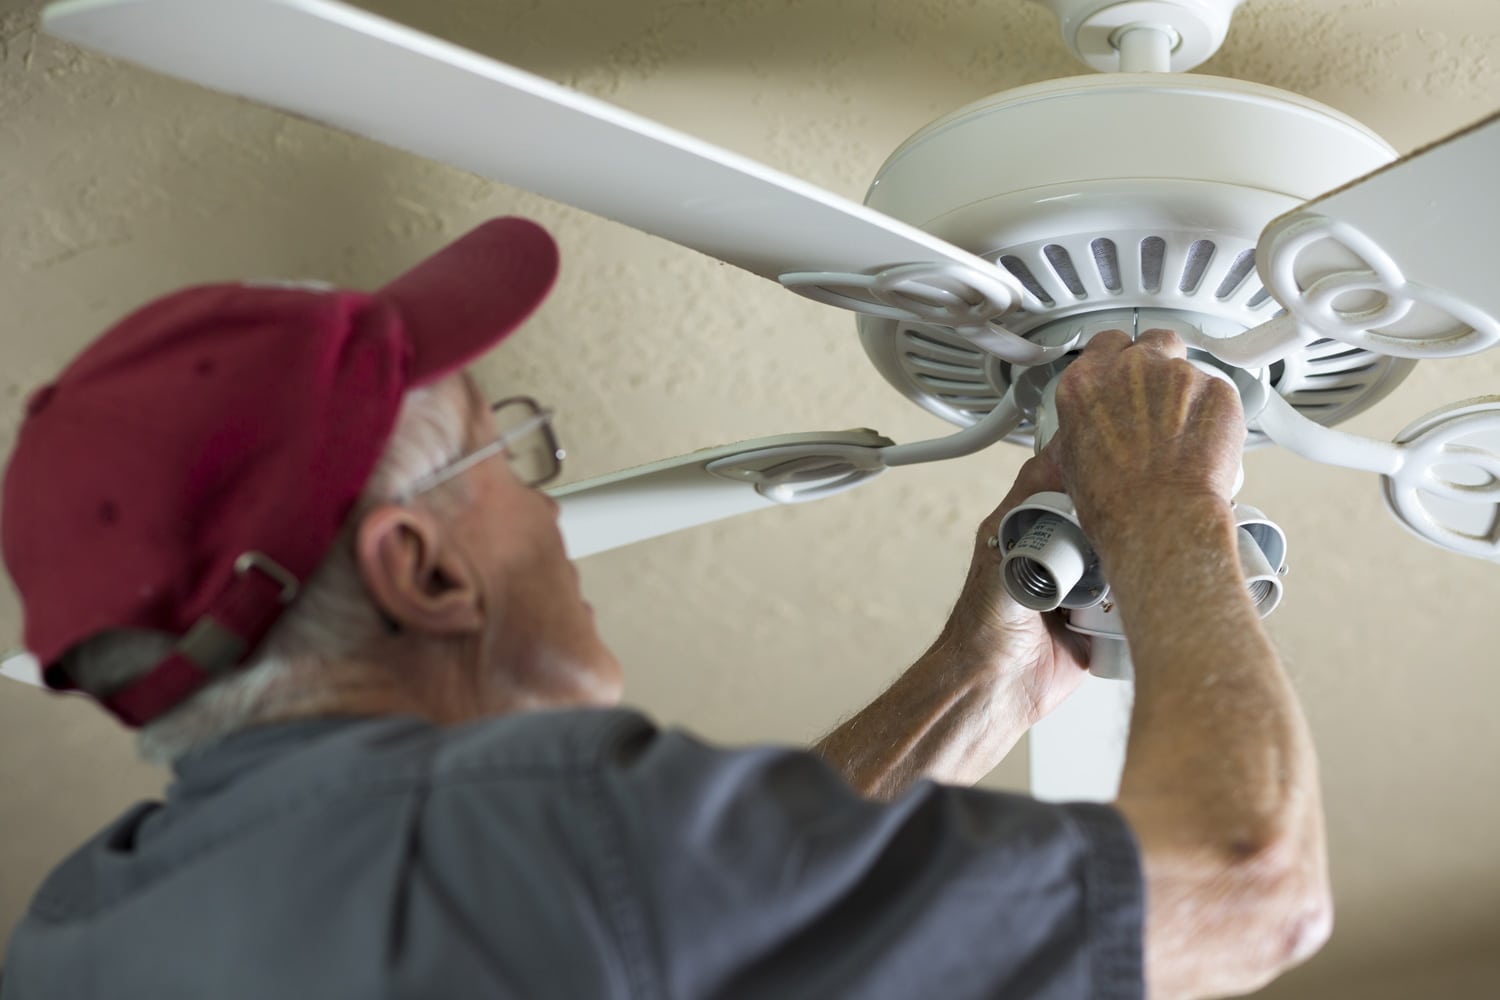 Electrician repairing ceiling fan for neighbor. He replaced the motor for the fan. Blue collar Caucasian senior man is retired but is still active and enjoying doing small repairs for others.